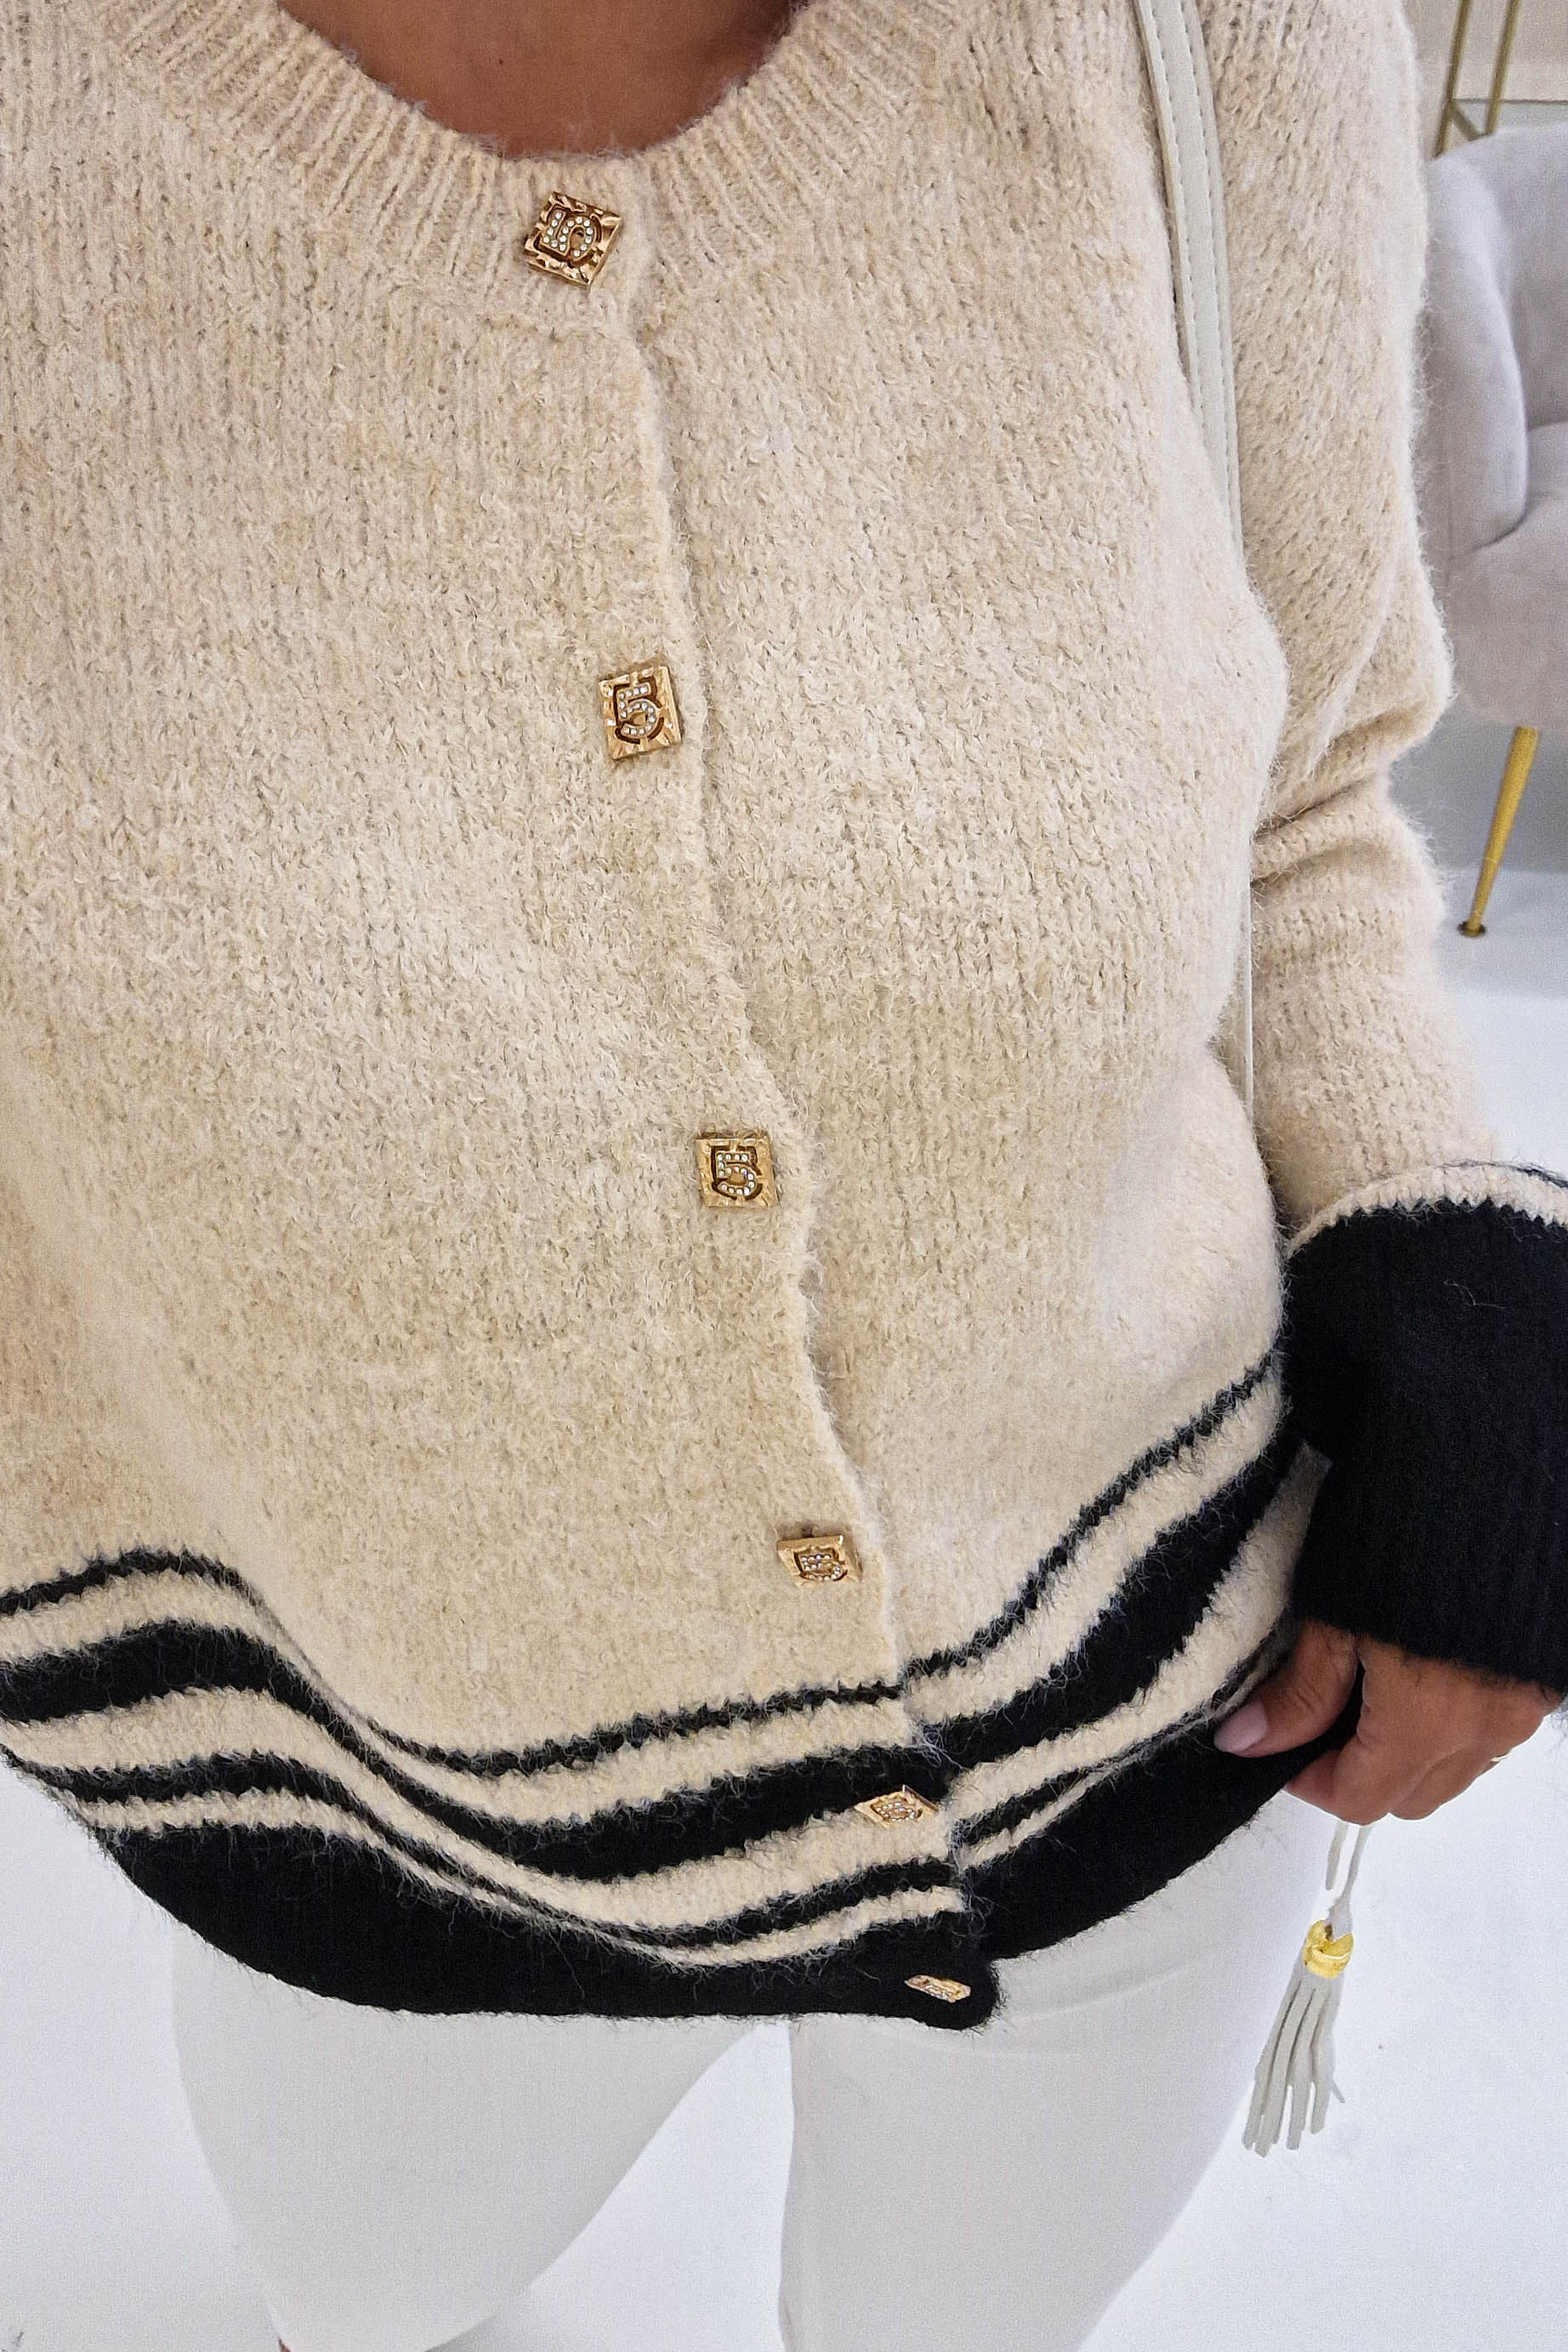 done-g8682-beige-cardi-with-black-stripes-and-gold-diamante-buttons-beige-graciela-cardigan-51060598899029.jpg